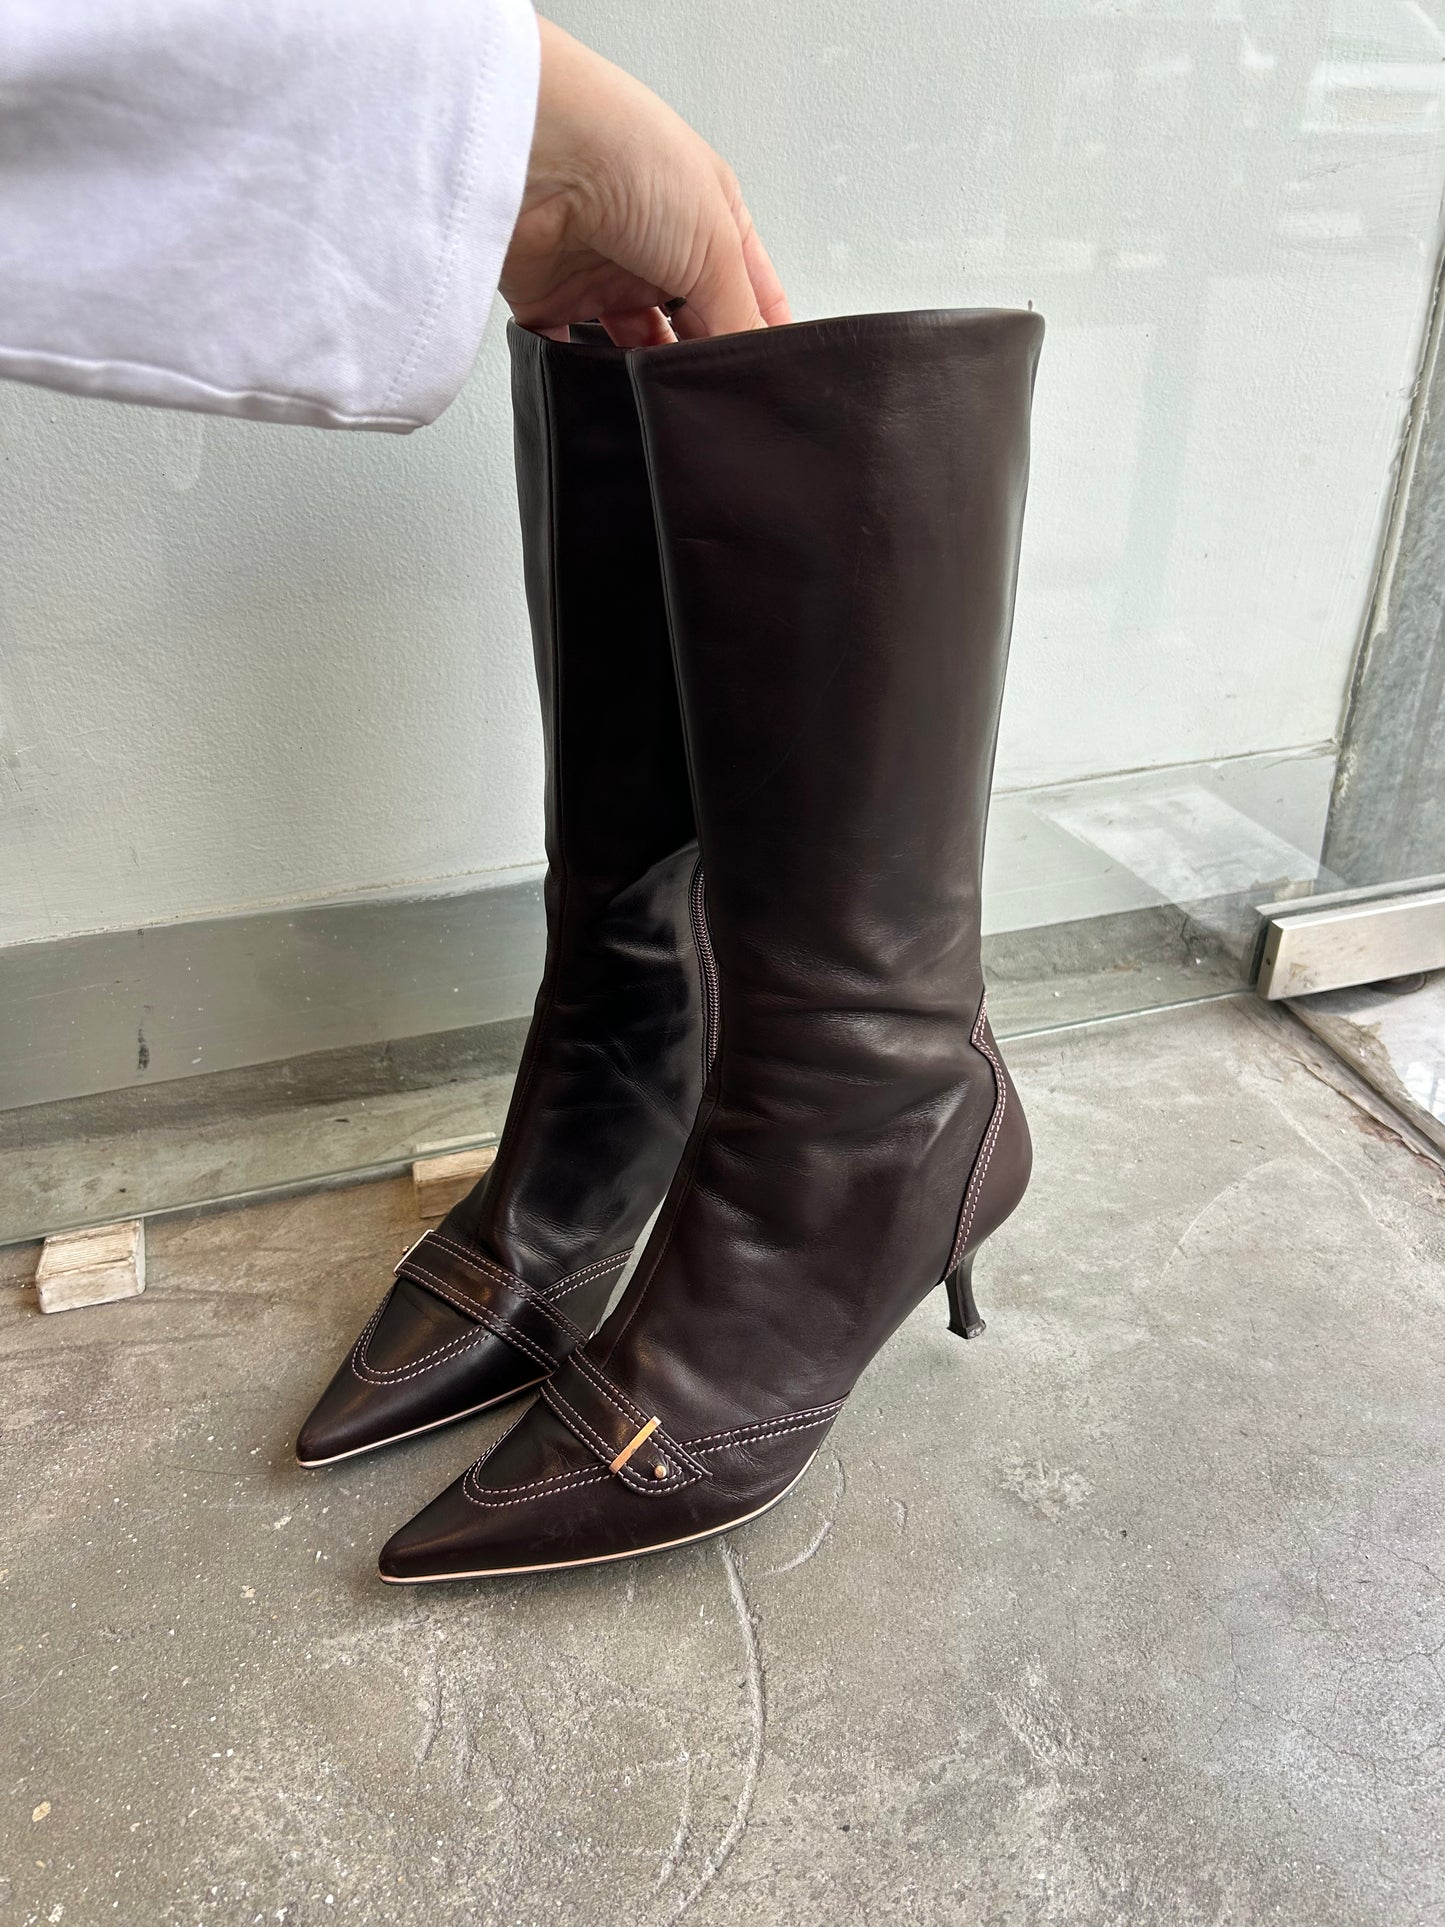 Japanese pointed heel boots